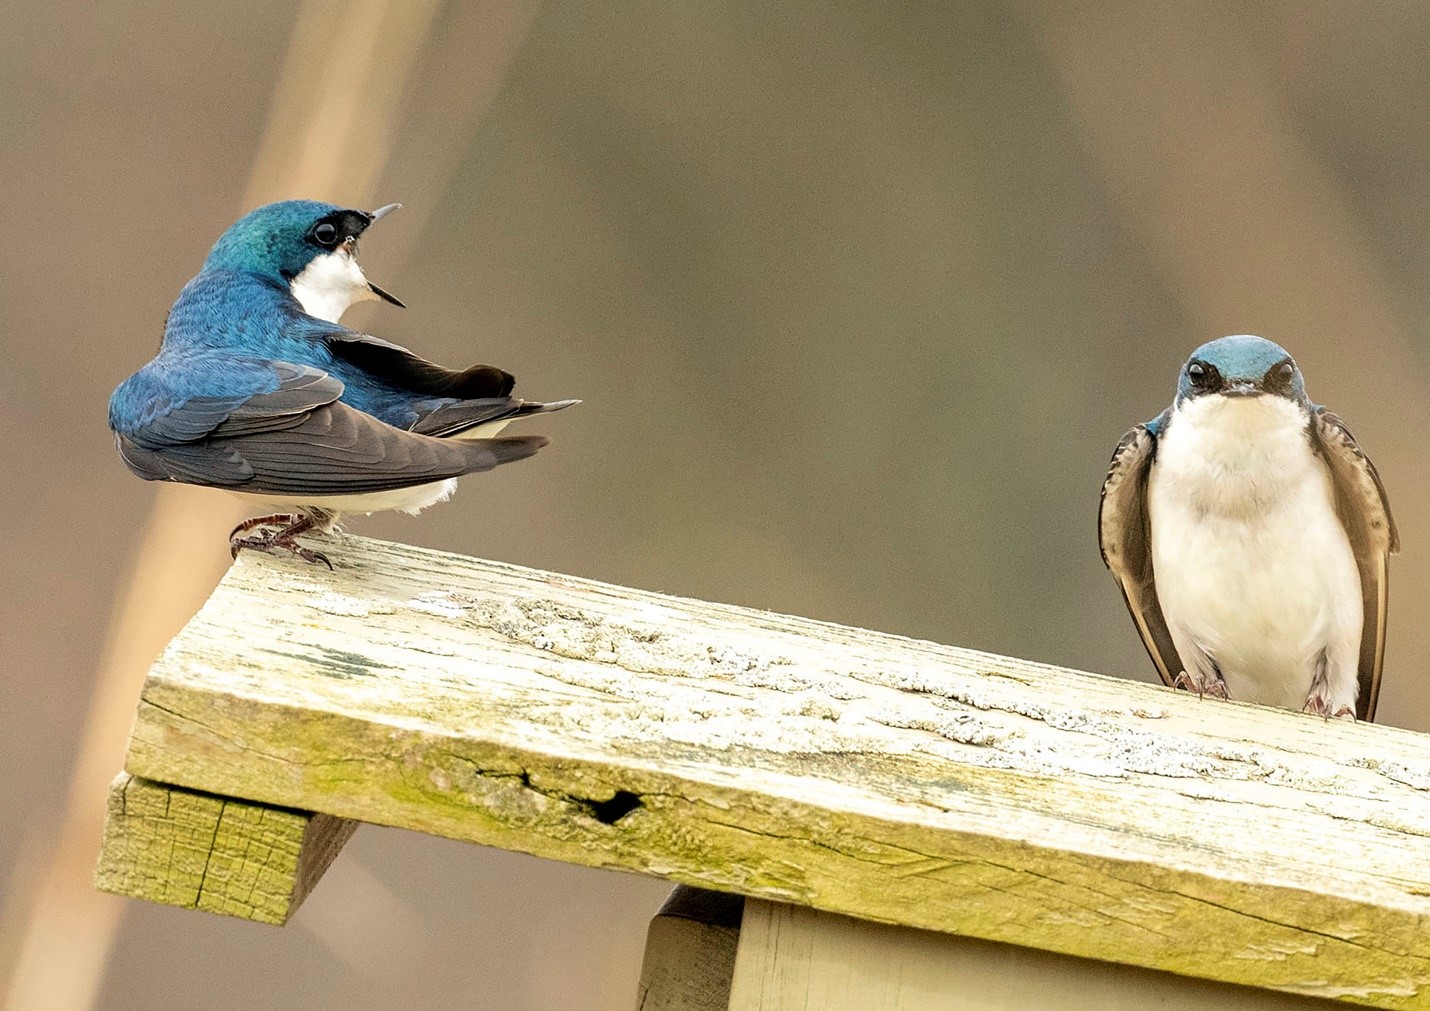 Two blue and white birds sit on a wooden structure. One faces the camera and one has it’s beak open looking at the other bird.